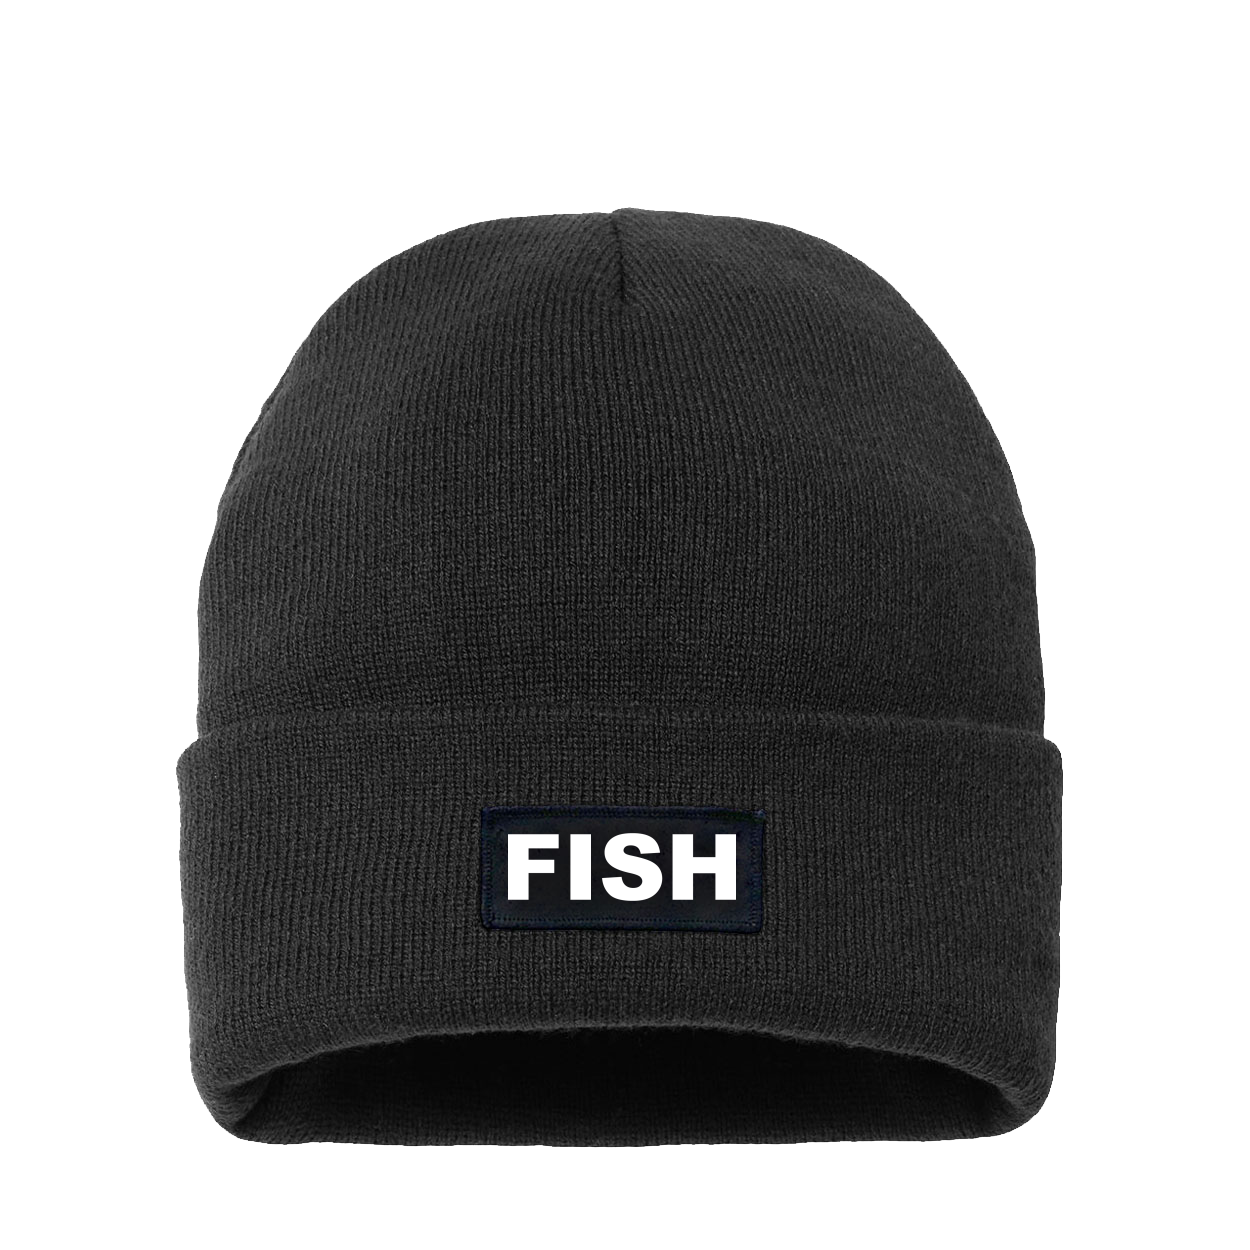 Fish Brand Logo Night Out Woven Patch Night Out Sherpa Lined Cuffed Beanie Black